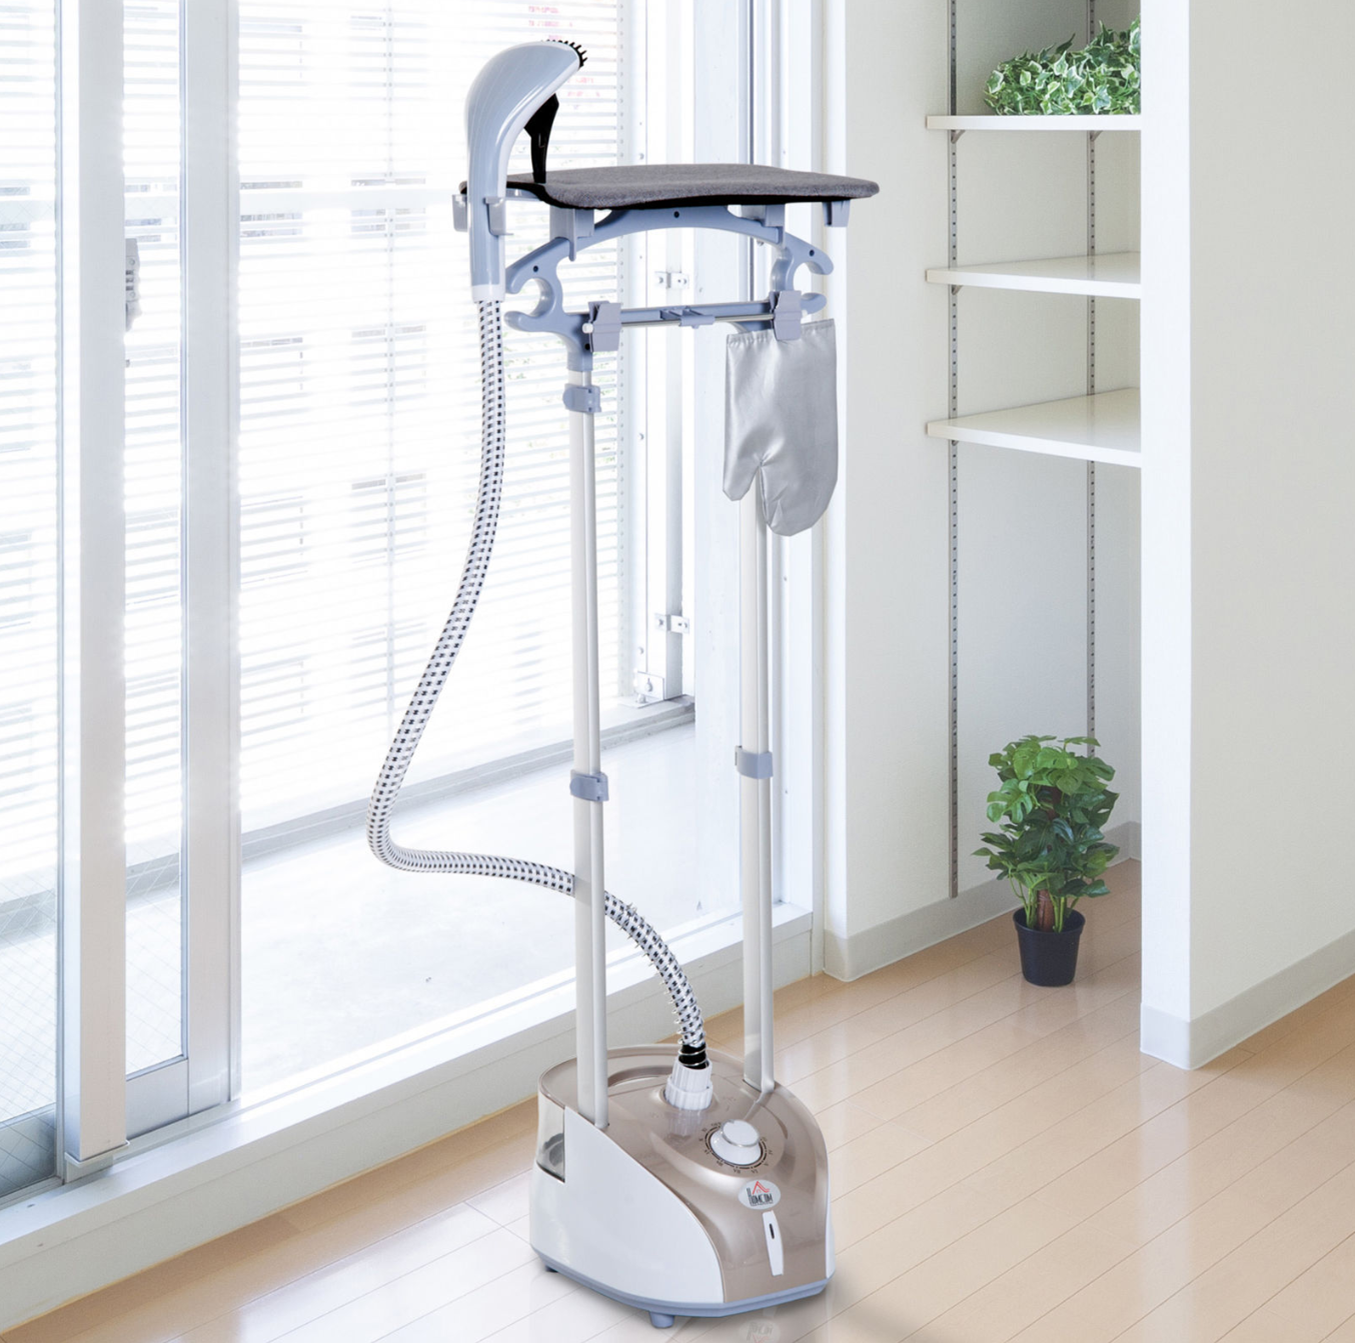 2L Vertical Garment Steamer / Iron with Ironing Board for Clothes and Fabrics